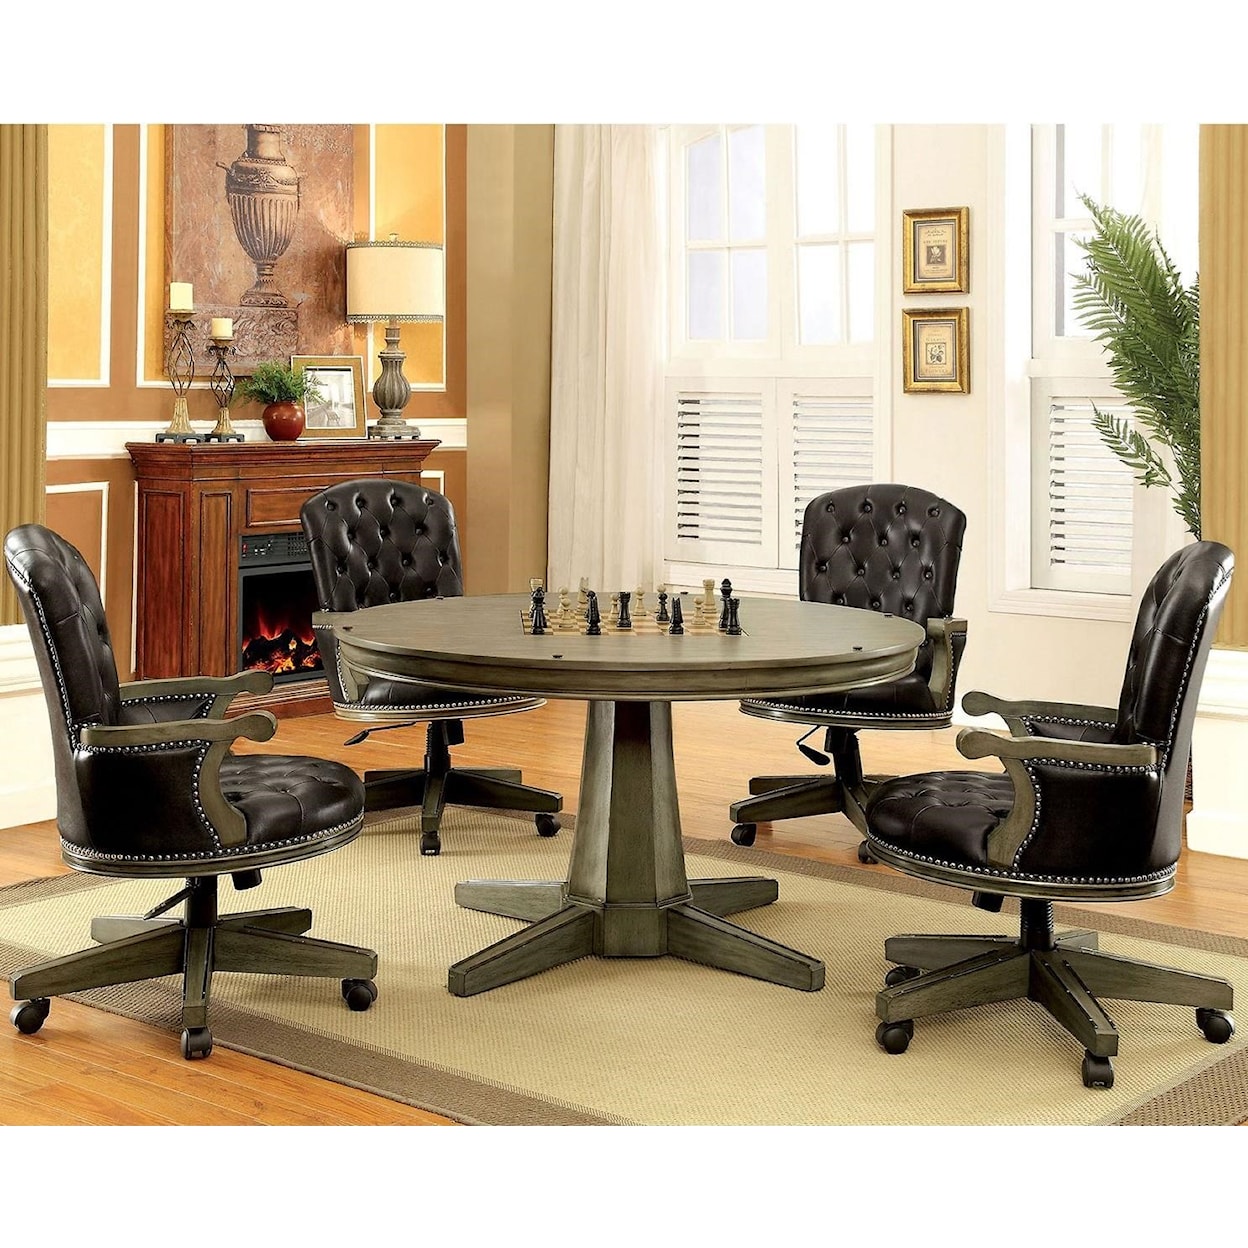 FUSA Yelena Table and 4 Chairs